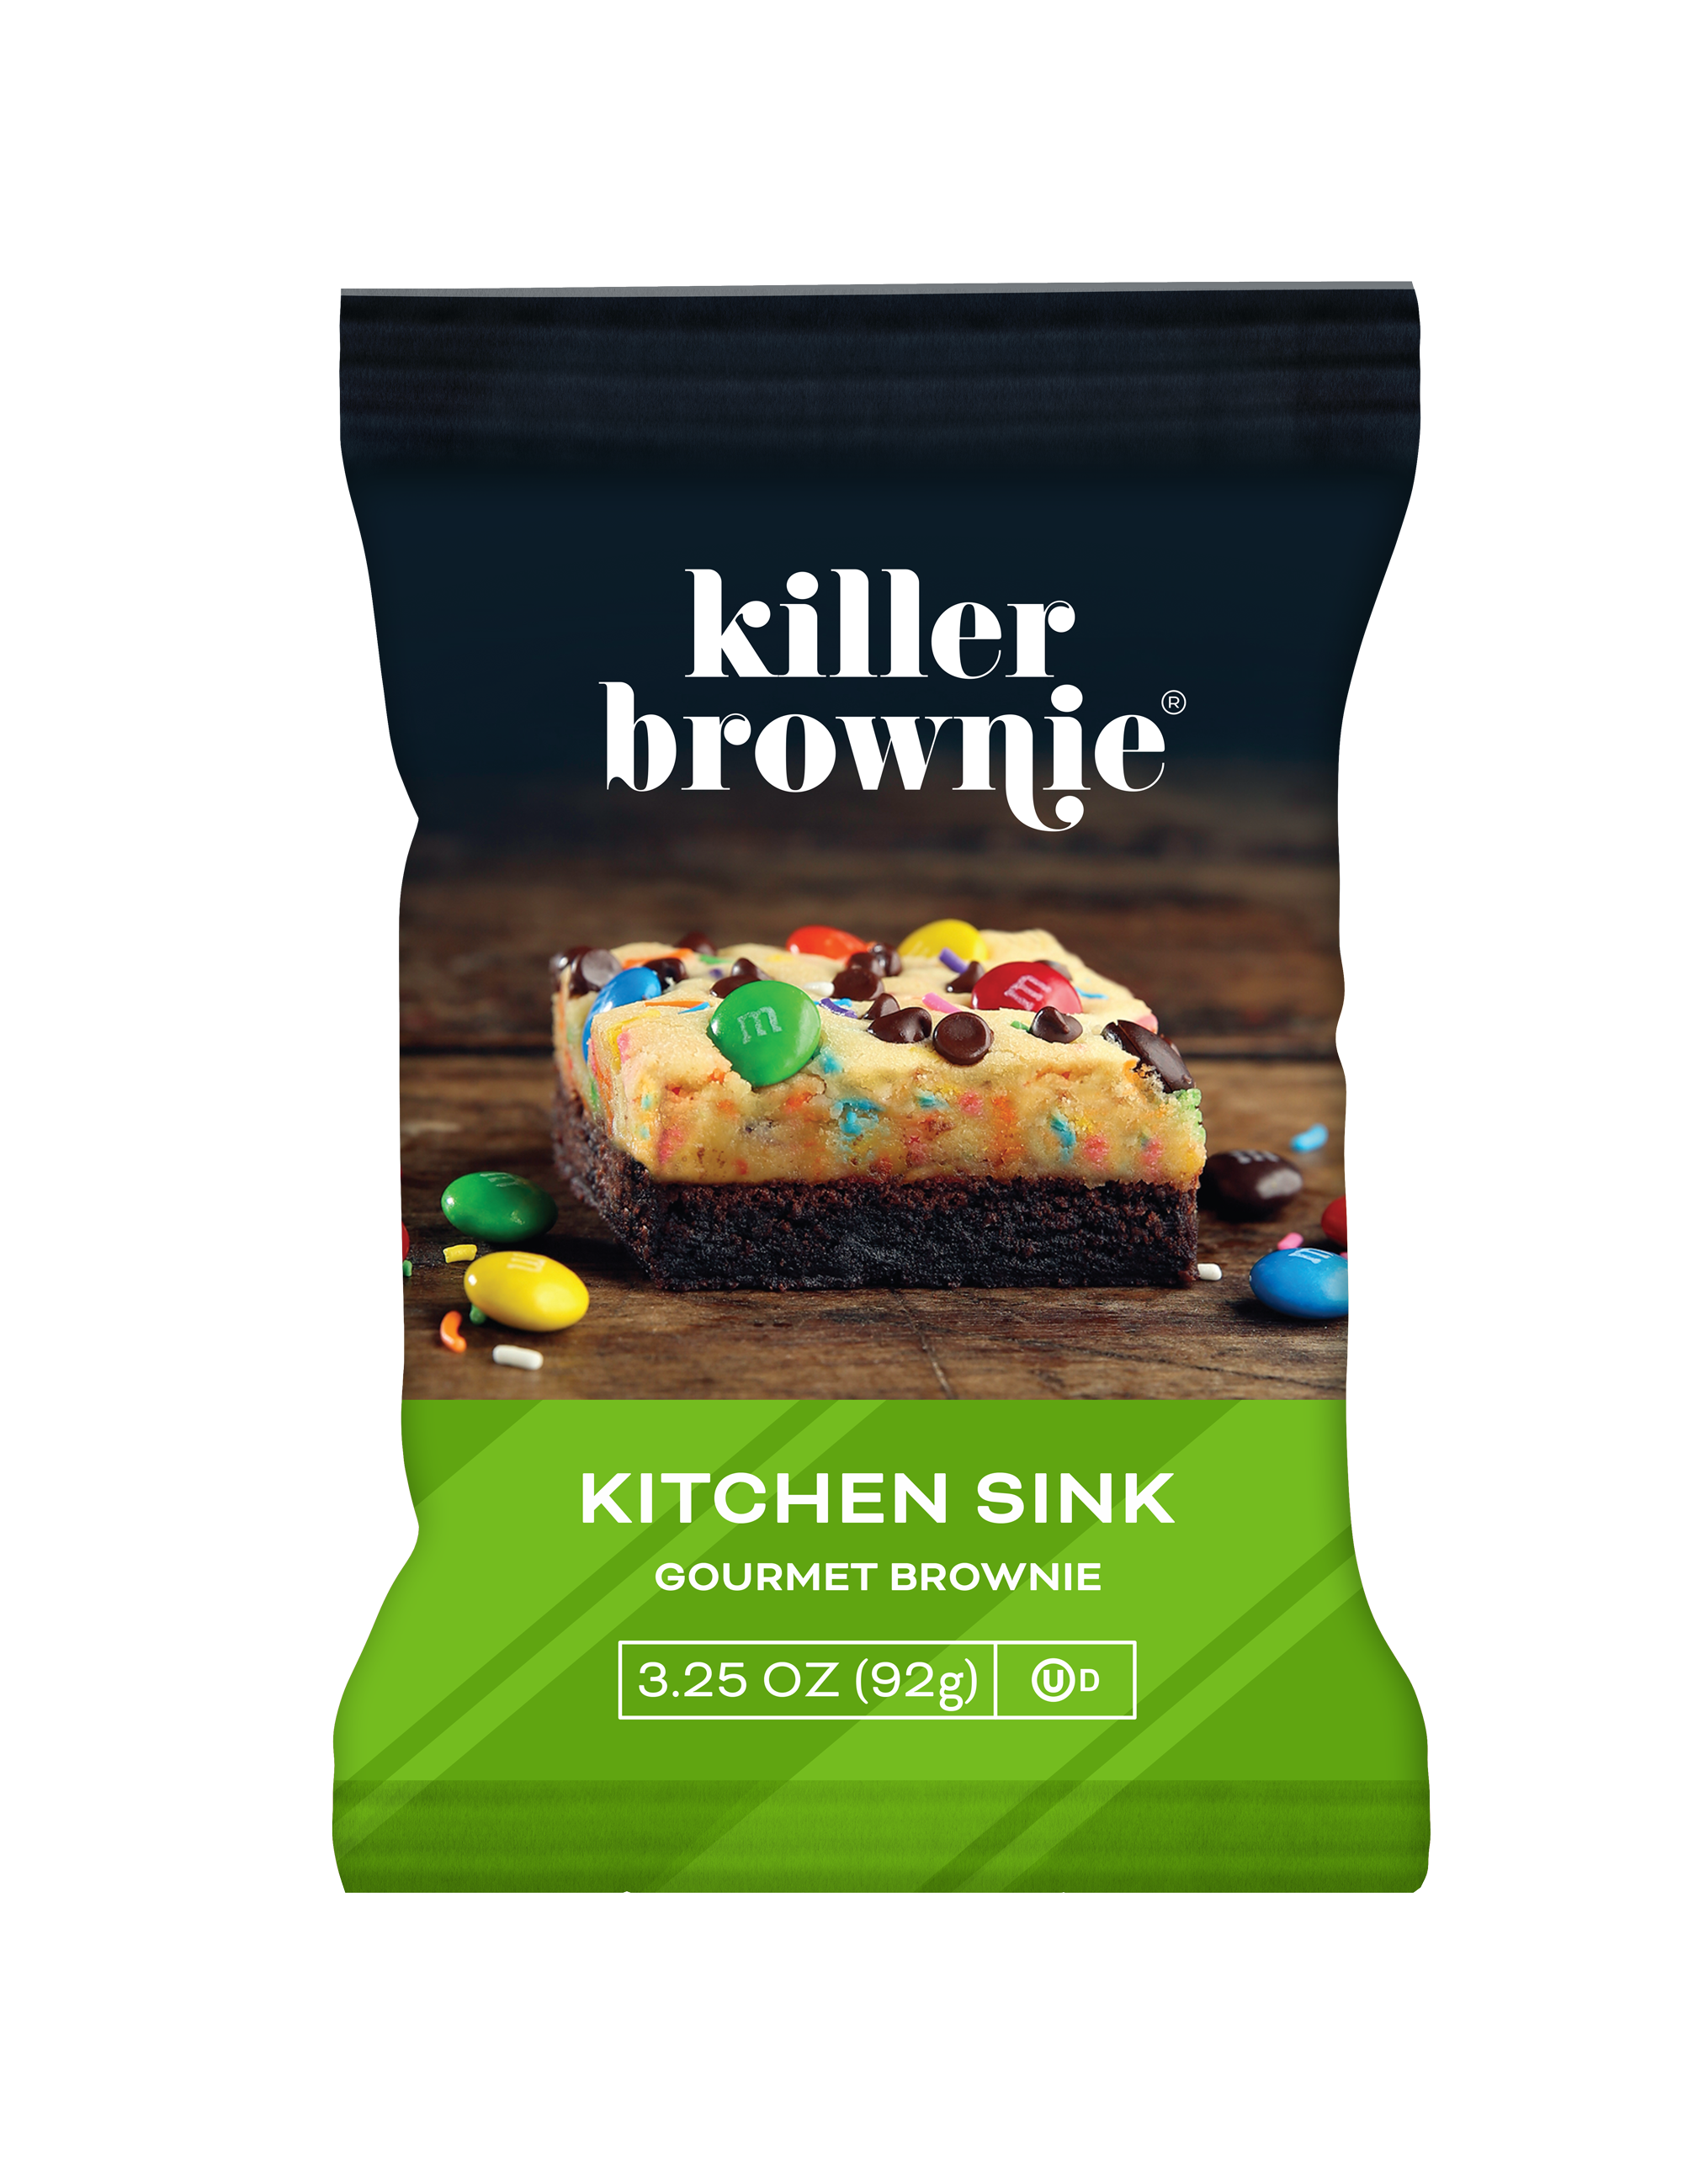 The Killer Brownie Co.® today announced that its decadent, gourmet Kitchen Sink brownies are now available with individual packaging, designed for distribution to grocery, convenience stores, food service, restaurants and more.The Kitchen Sink brownie is mixed with rainbow sprinkles and topped with M&M's® and mini chocolate chips, all baked atop a decadent fudge brownie.